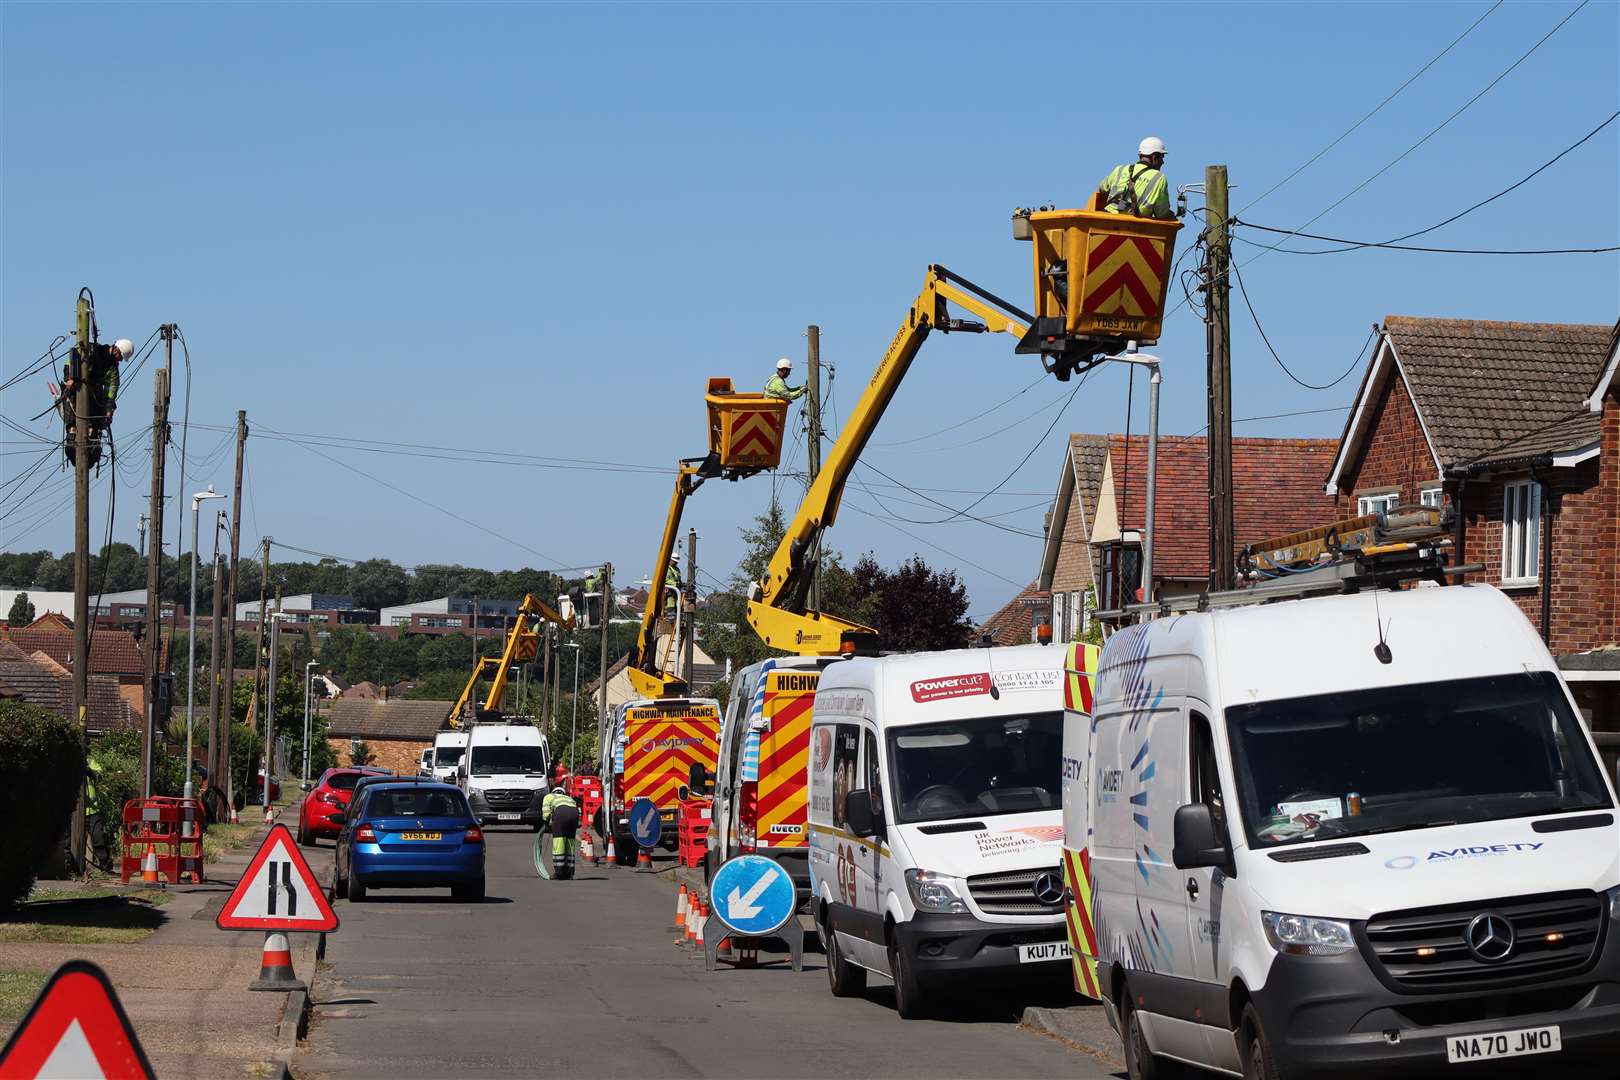 Engineers from Avidety using cherry pickers to string new electricity cables to poles for UK Power Networks